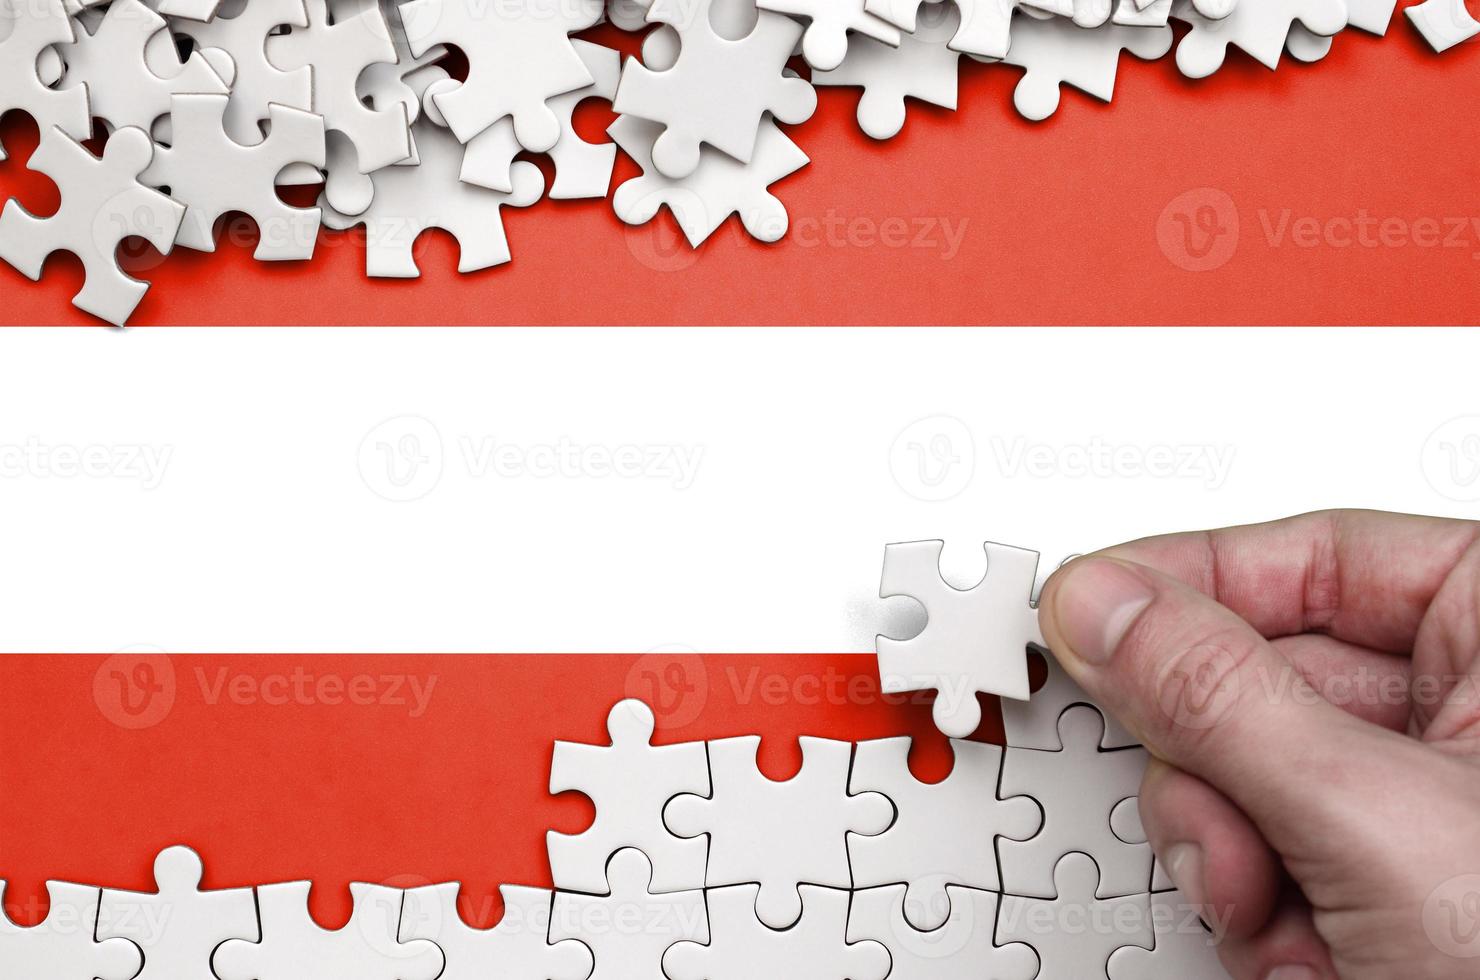 Austria flag is depicted on a table on which the human hand folds a puzzle of white color photo